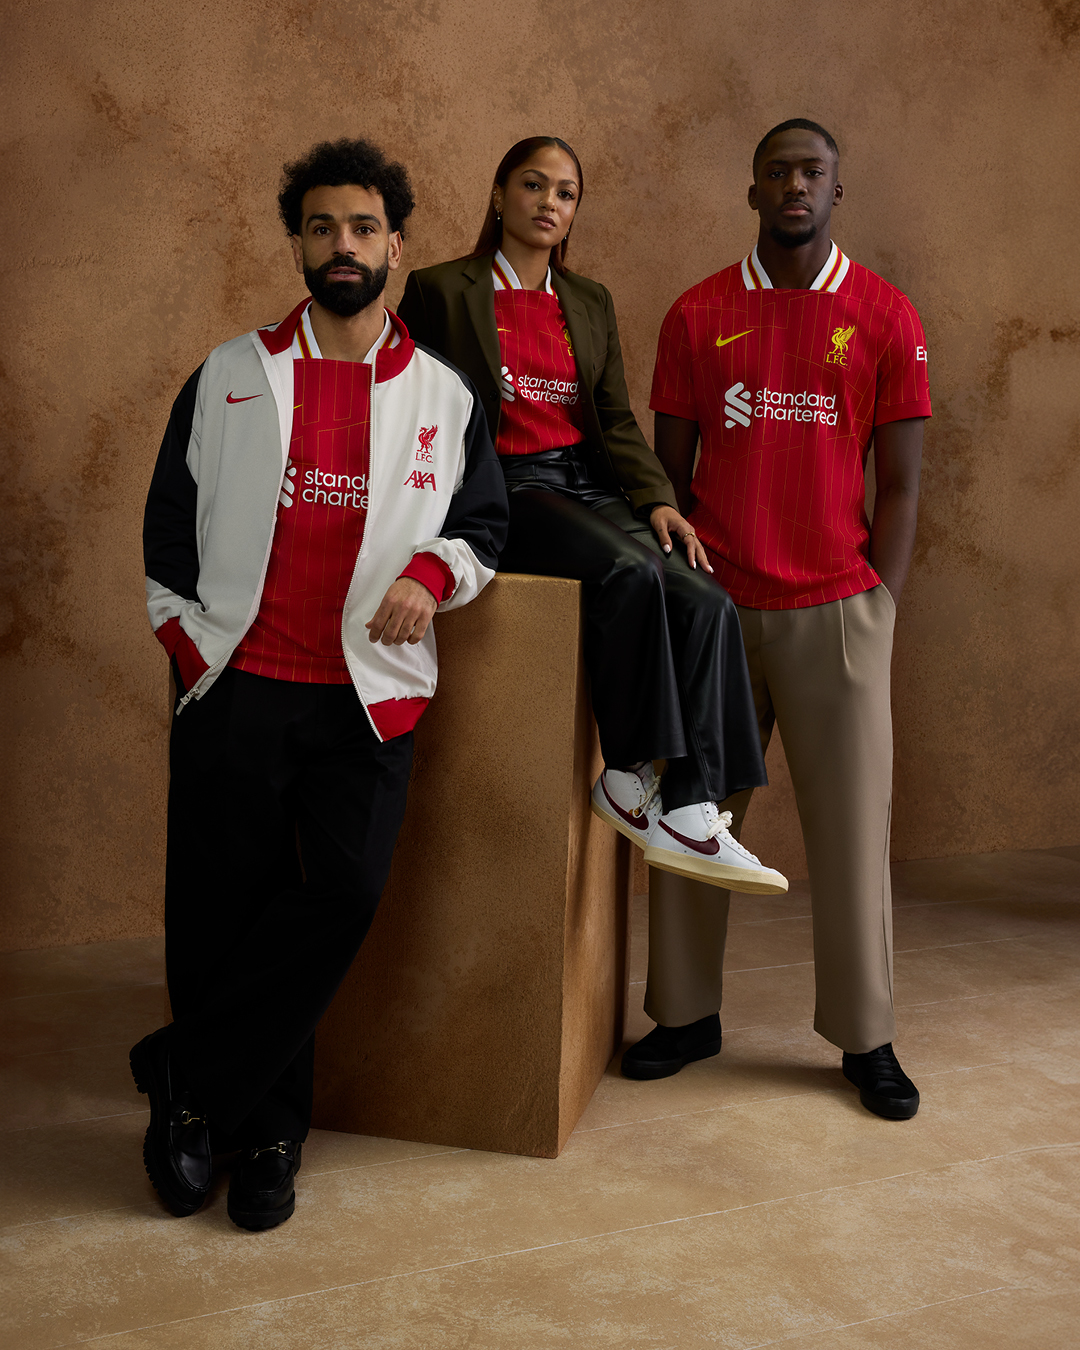 Mohamed Salah, Taylor Hinds and Ibrahima Konate model the new 2024/25 home kit and anthem jacket.

The red jersey features a chrome yellow pattern design which sees a modernised take on the legendary '84 home shirt, a season which saw the Reds become European Champions for the 4th time in Rome and the first English Club to win a Treble of major honours.